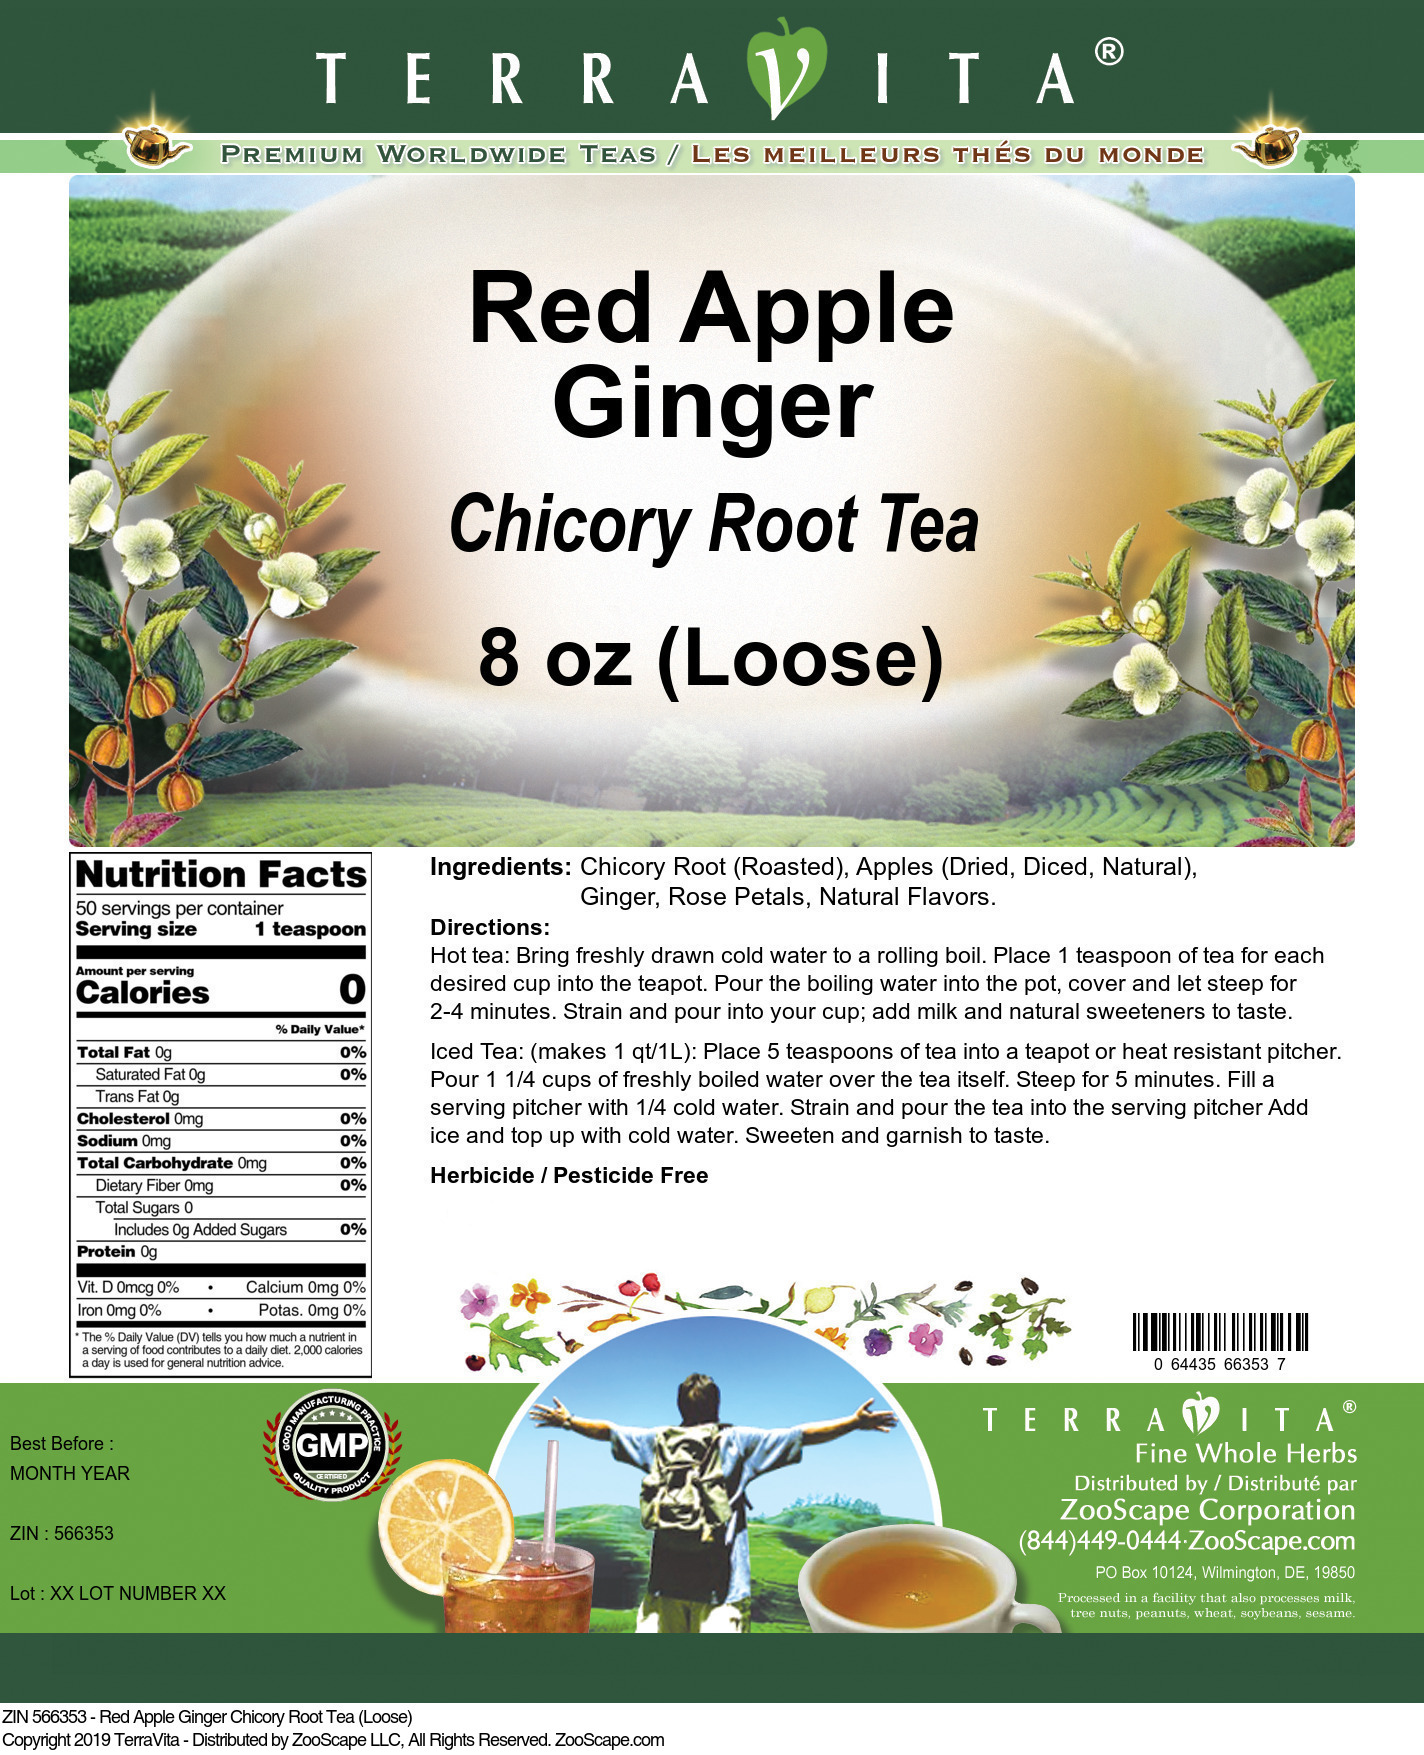 Red Apple Ginger Chicory Root Tea (Loose) - Label